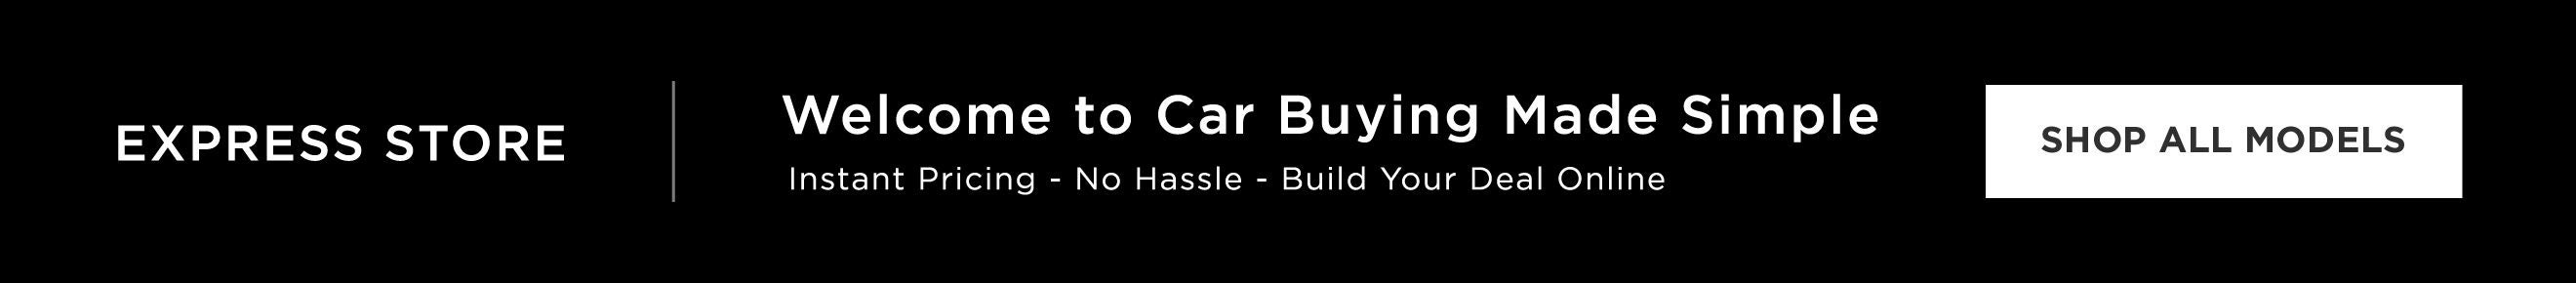 express store- welcome to car buying made simple